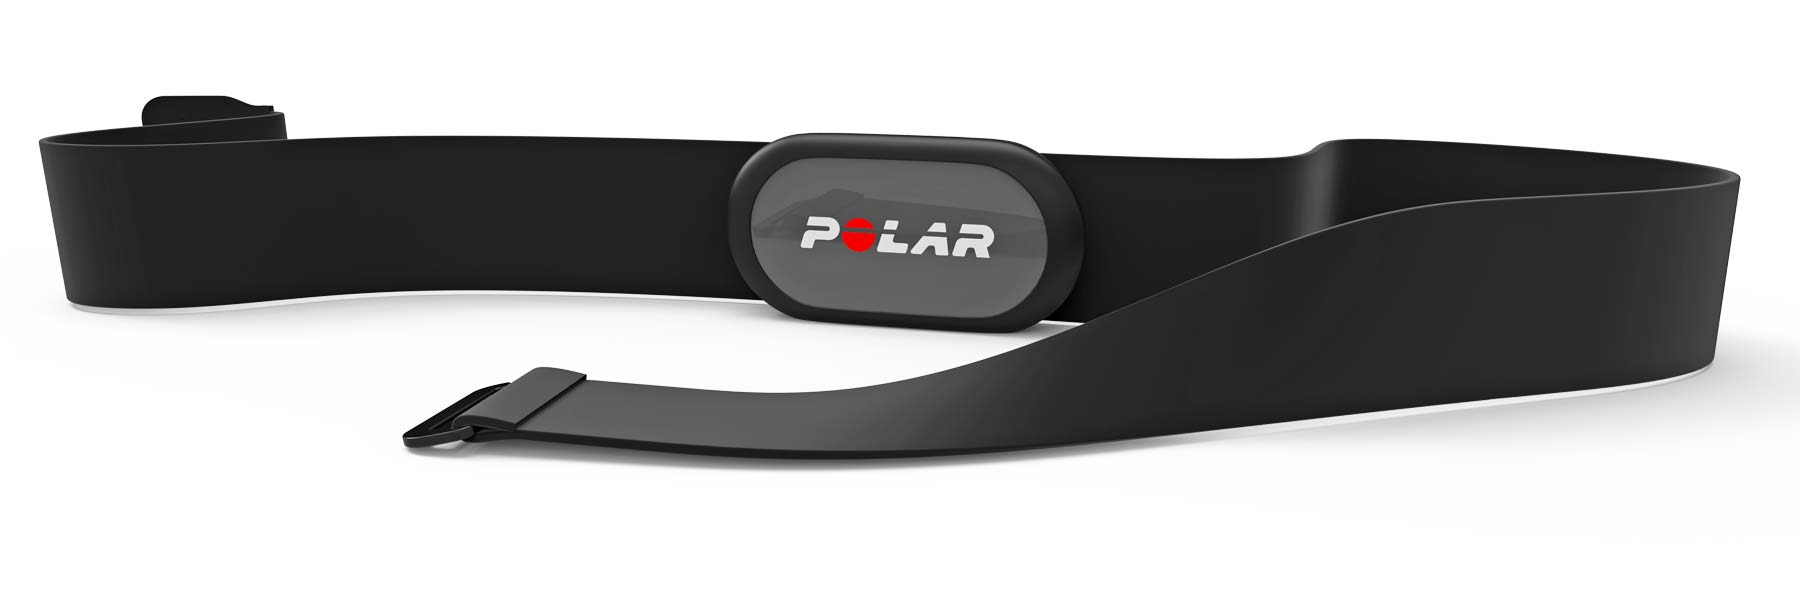 Polar H9 heart rate monitor strap, affordable heartrate sensor with BLE ANT+ 5kHz